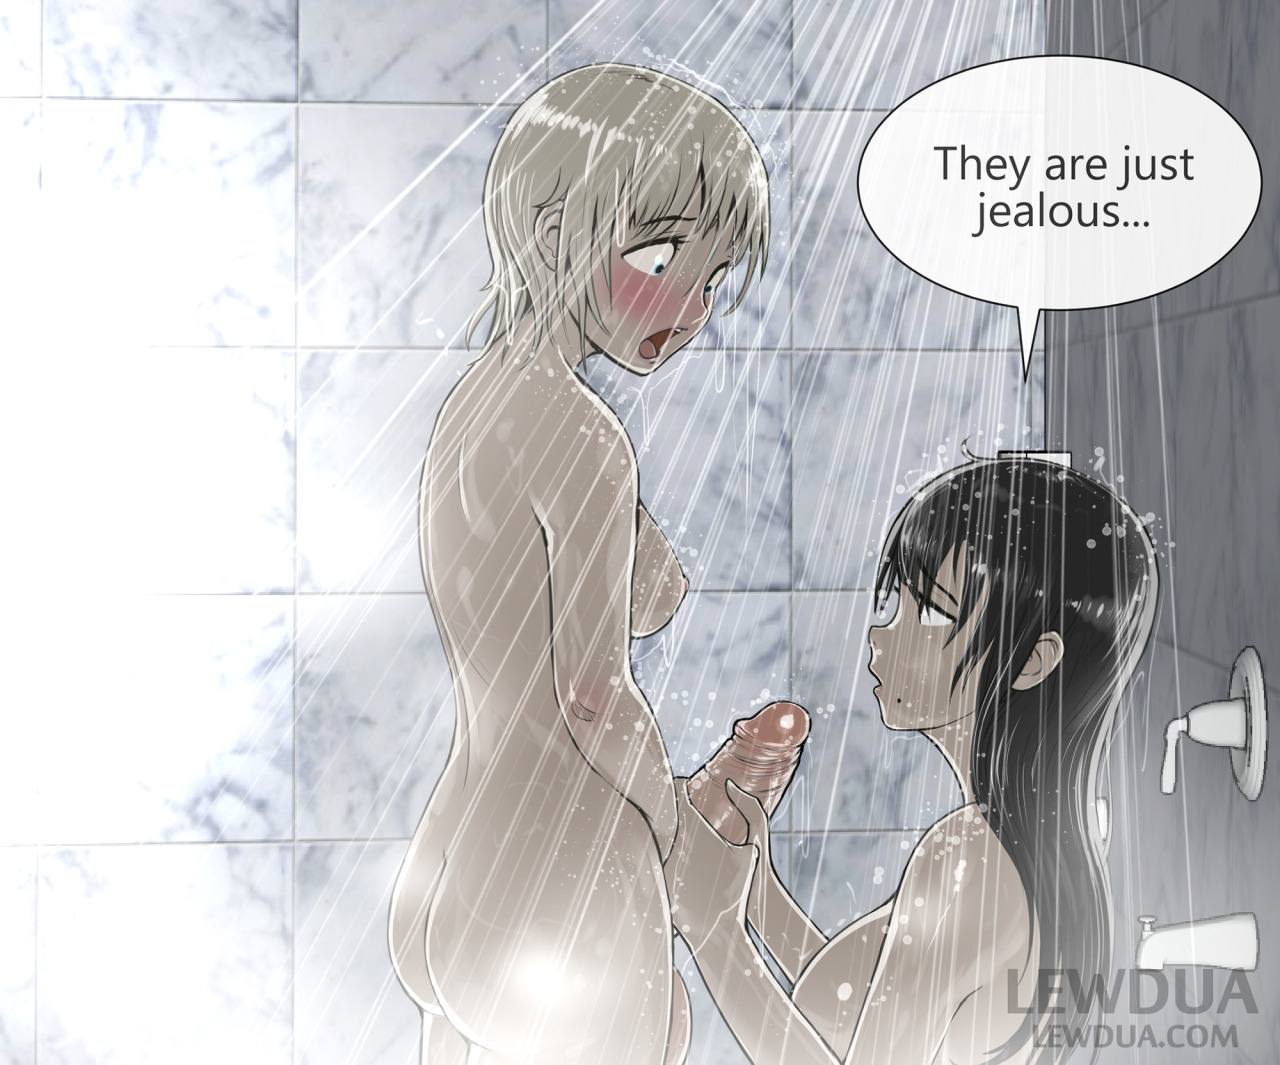 Shower show - Nessie and Alison